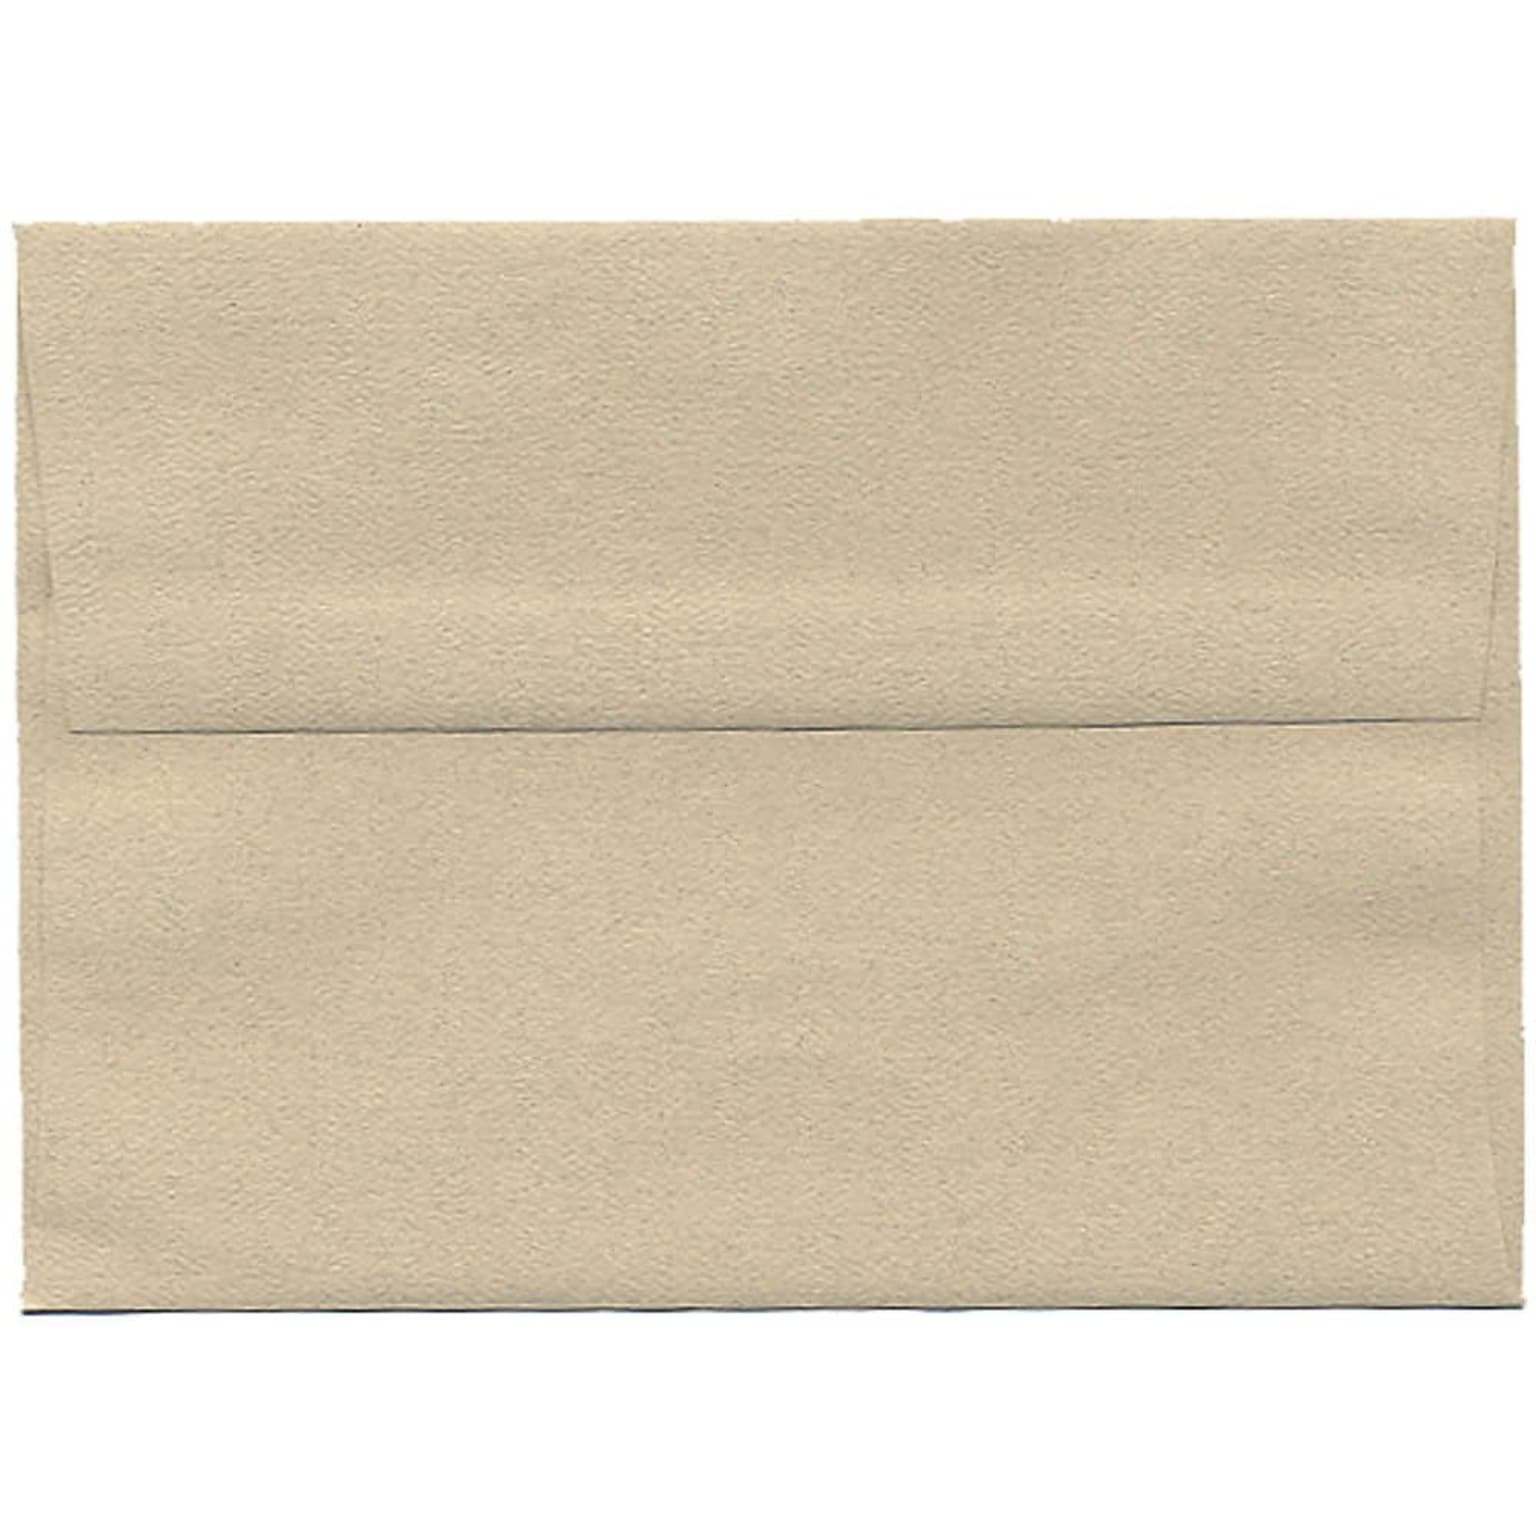 JAM Paper® A7 Passport Invitation Envelopes, 5.25 x 7.25, Sandstone Brown Recycled, 50/Pack (41403I)